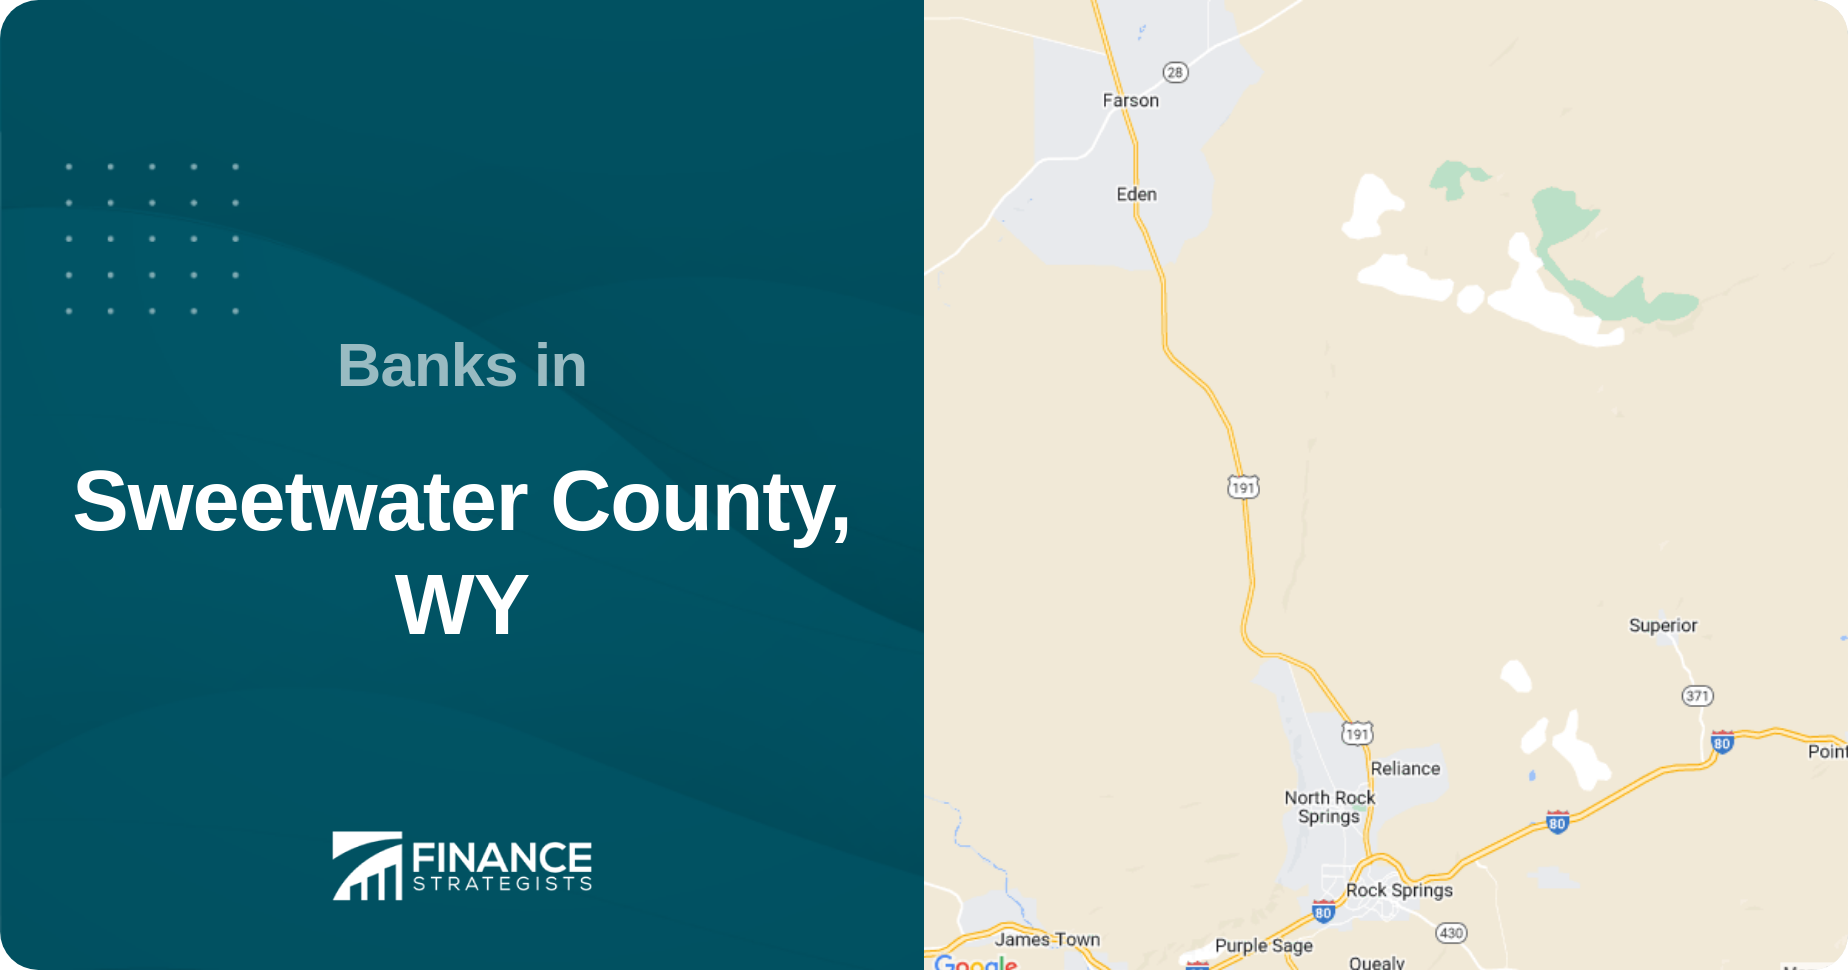 Banks in Sweetwater County, WY